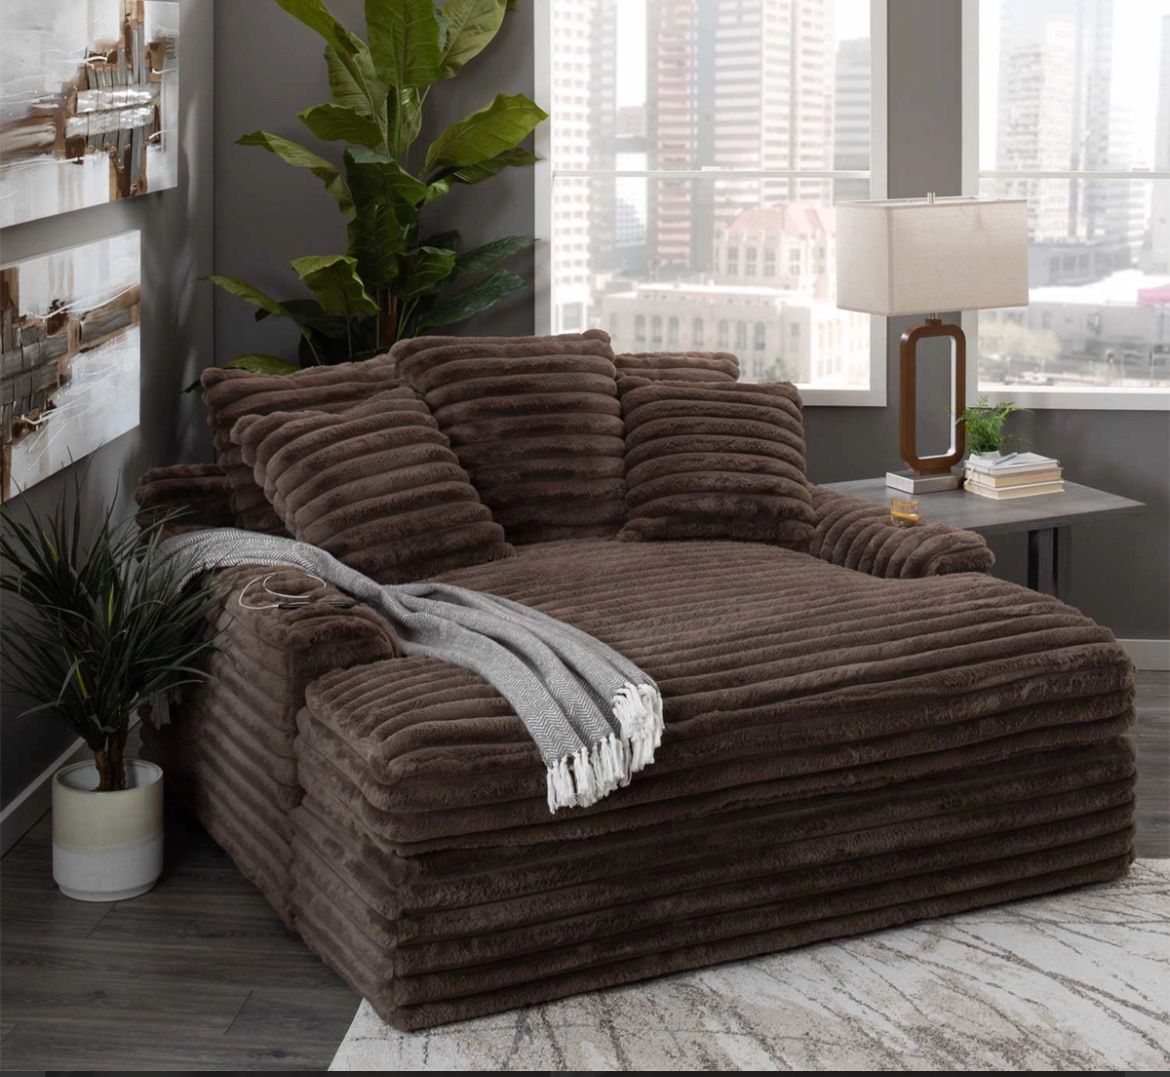 NEW Snuggle Chocolate Double Chaise Delivery Financing Available 